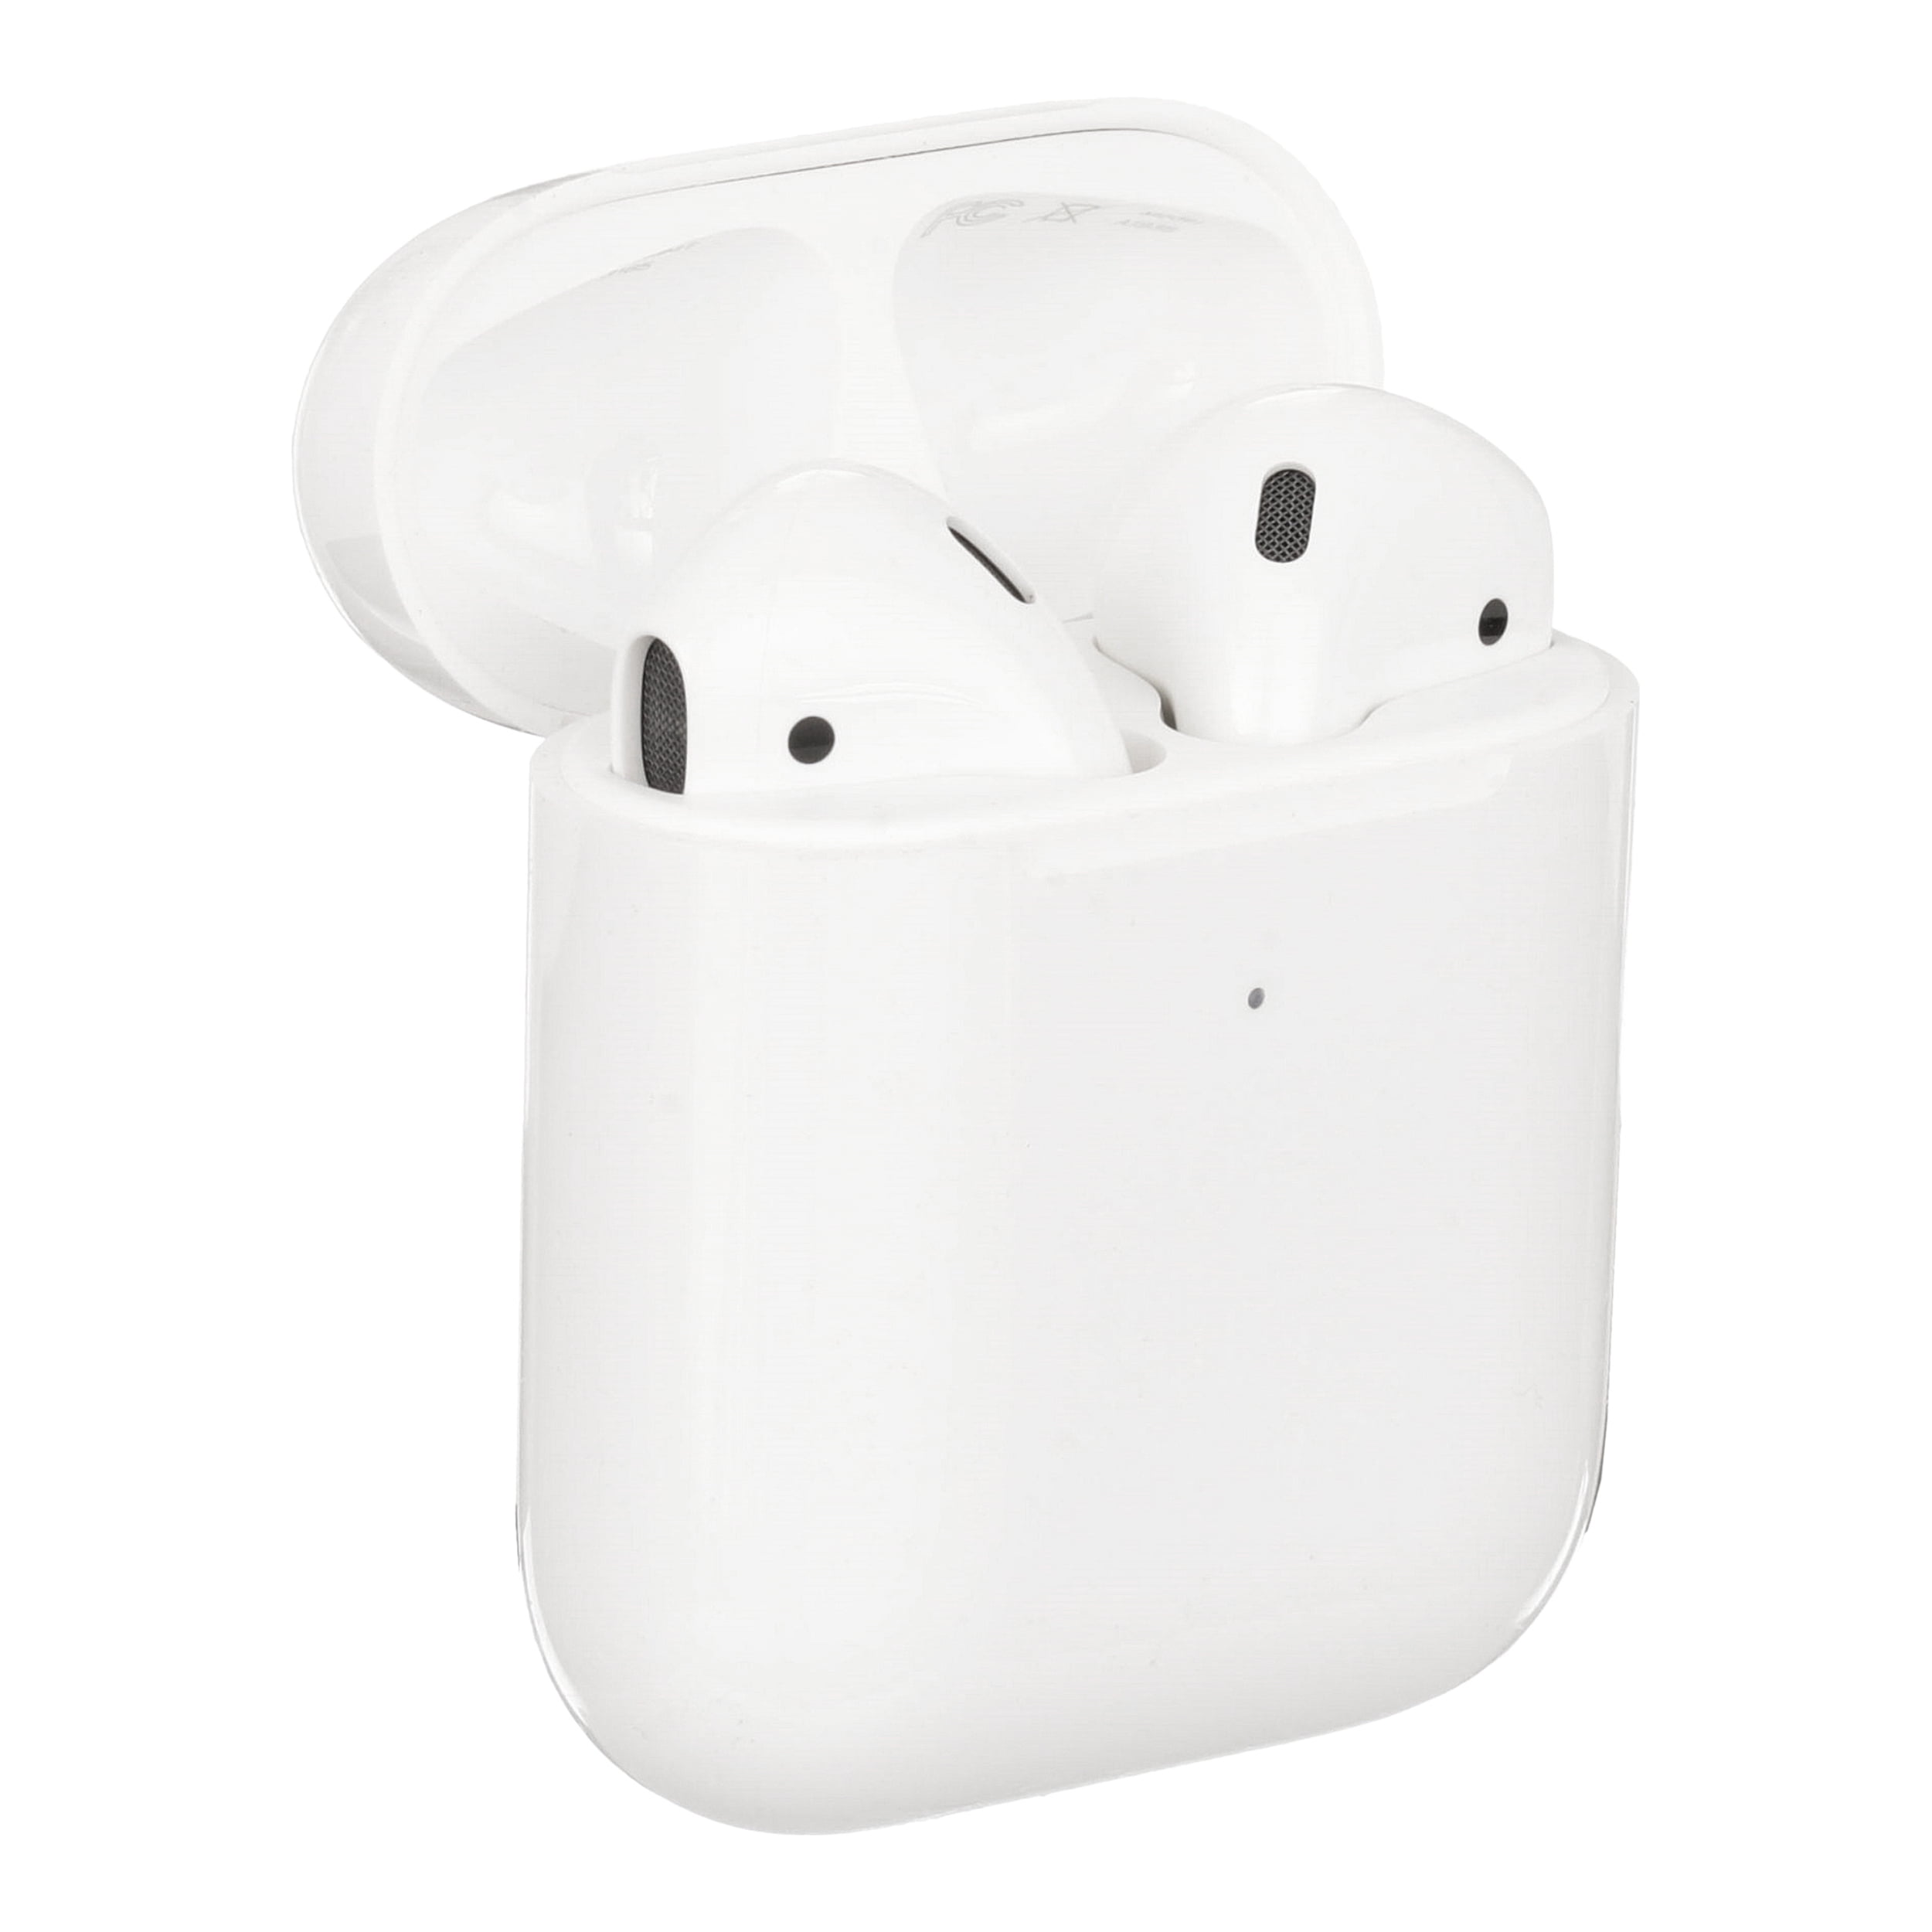 Suitable for Wireless Bluetooth Headset XIAONINGMENG Headphone Sets Elegant Classic Design Bluetooth Protective Sleeve White Original Size Airpods Charging Box Earphone Sets